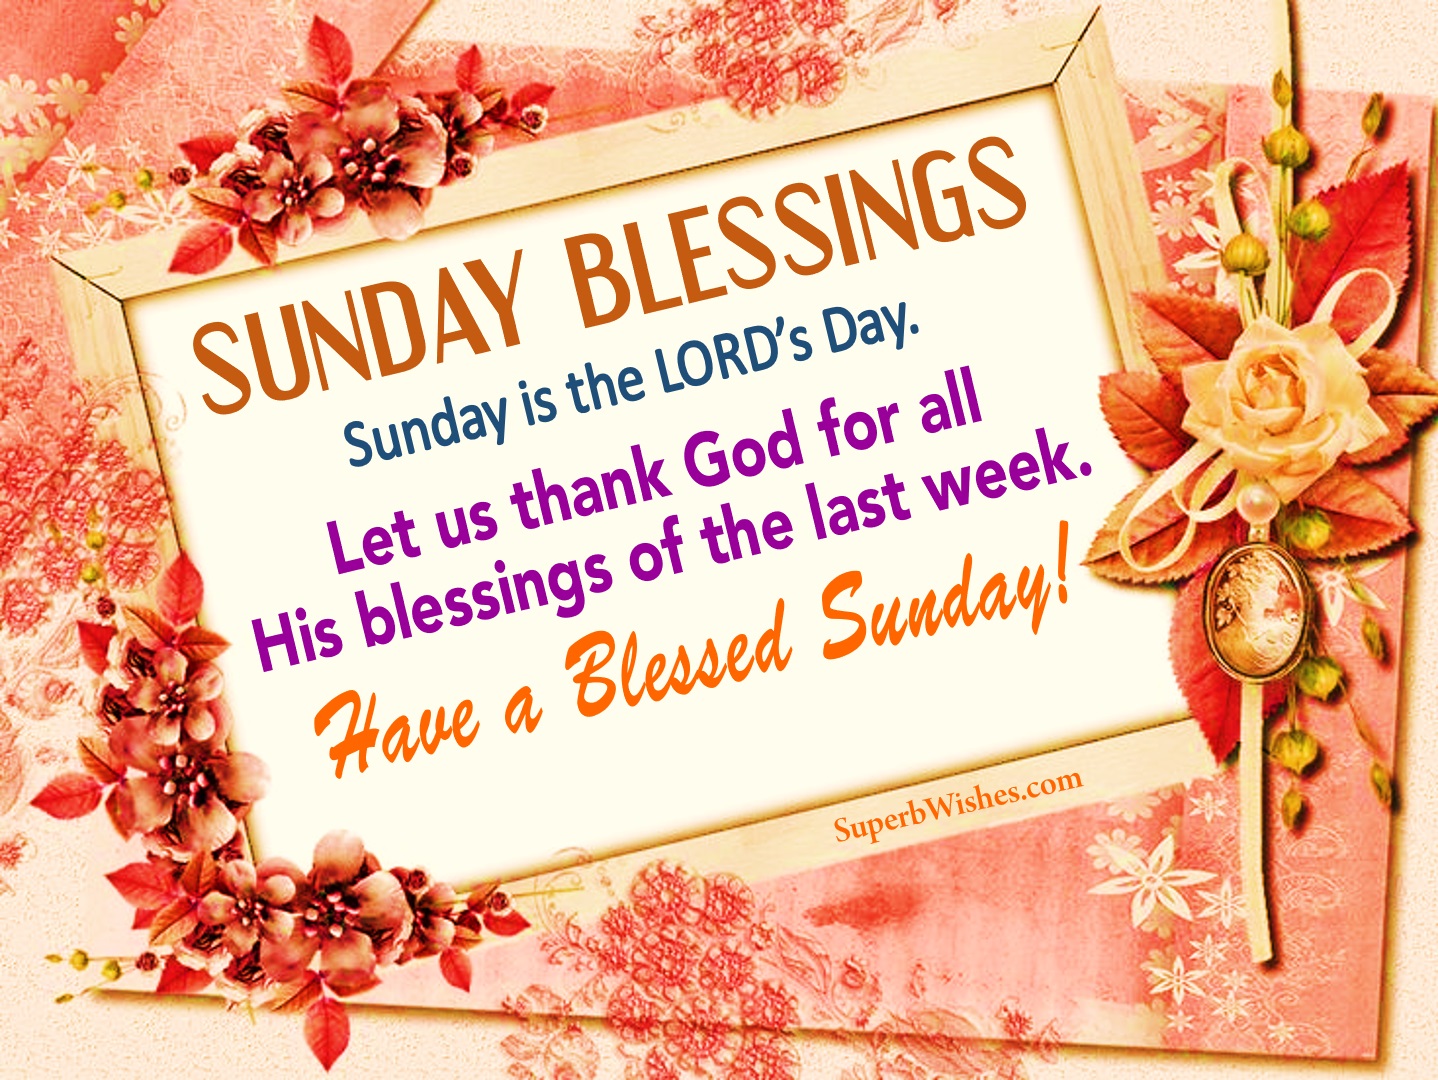 Have a blessed sunday images and quotes. Superbwishes.com